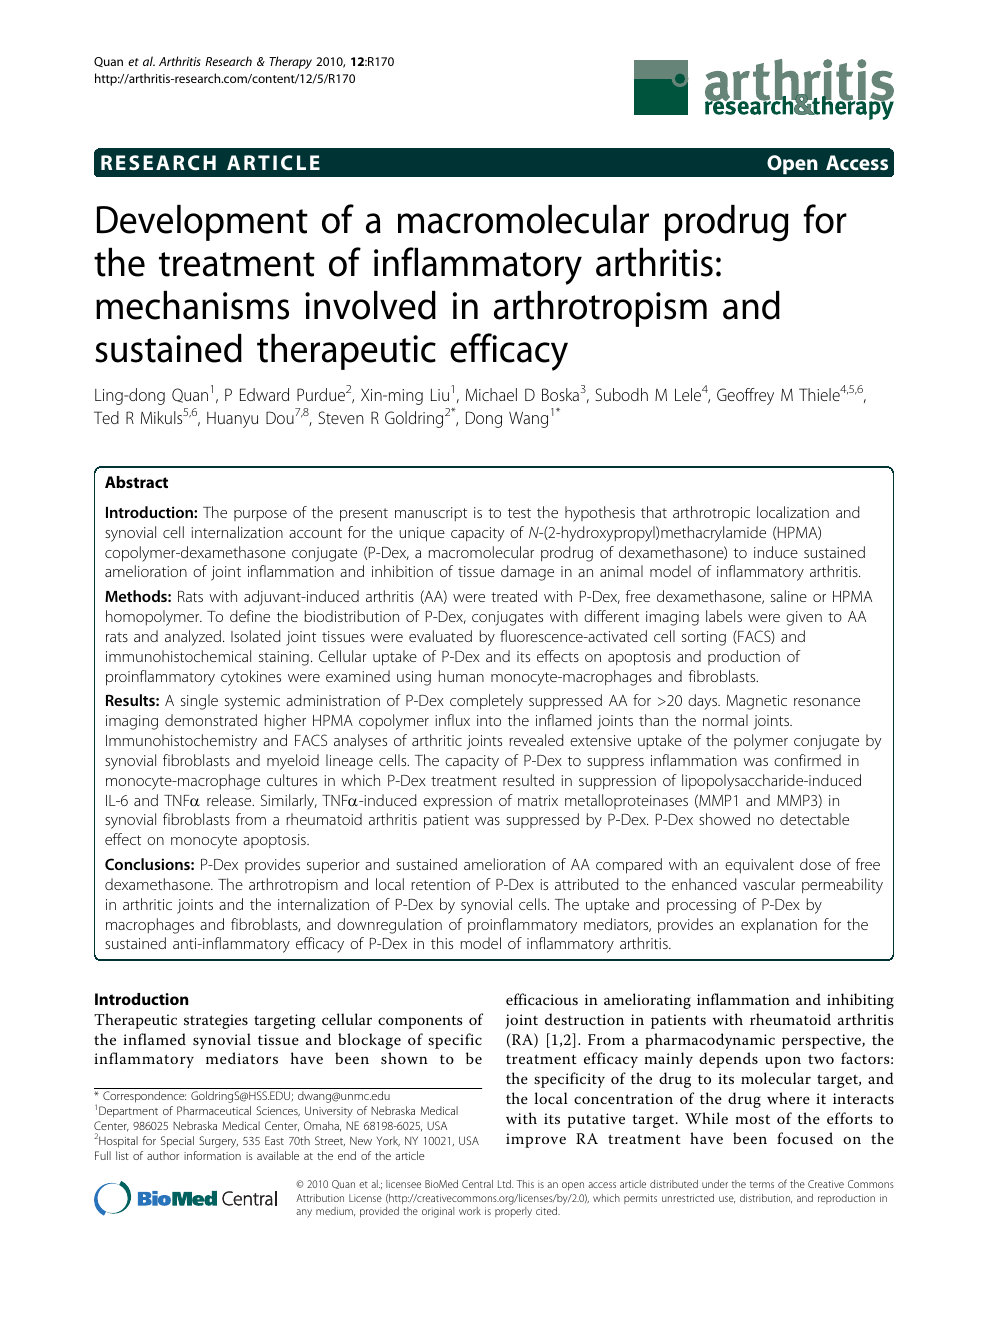 Development Of A Macromolecular Prodrug For The Treatment Of Inflammatory Arthritis Mechanisms Involved In Arthrotropism And Sustained Therapeutic Efficacy Topic Of Research Paper In Veterinary Science Download Scholarly Article Pdf And